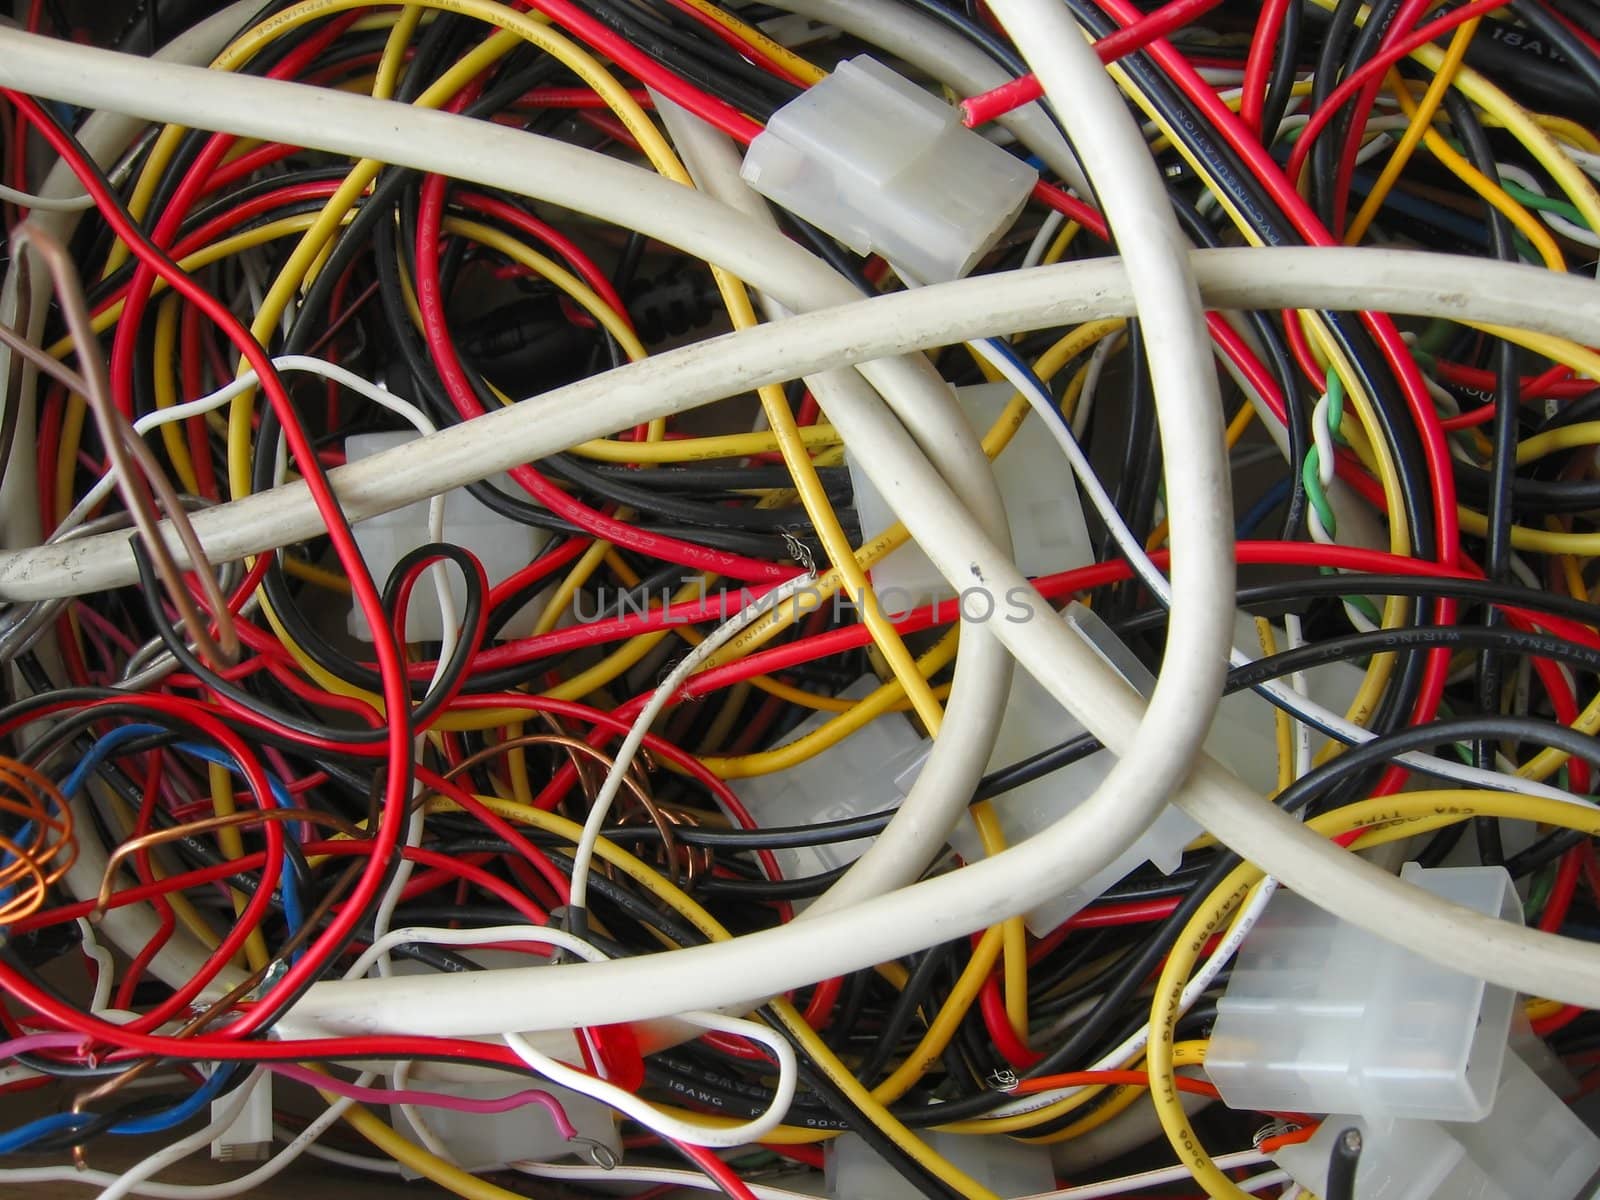 A pile of different wires